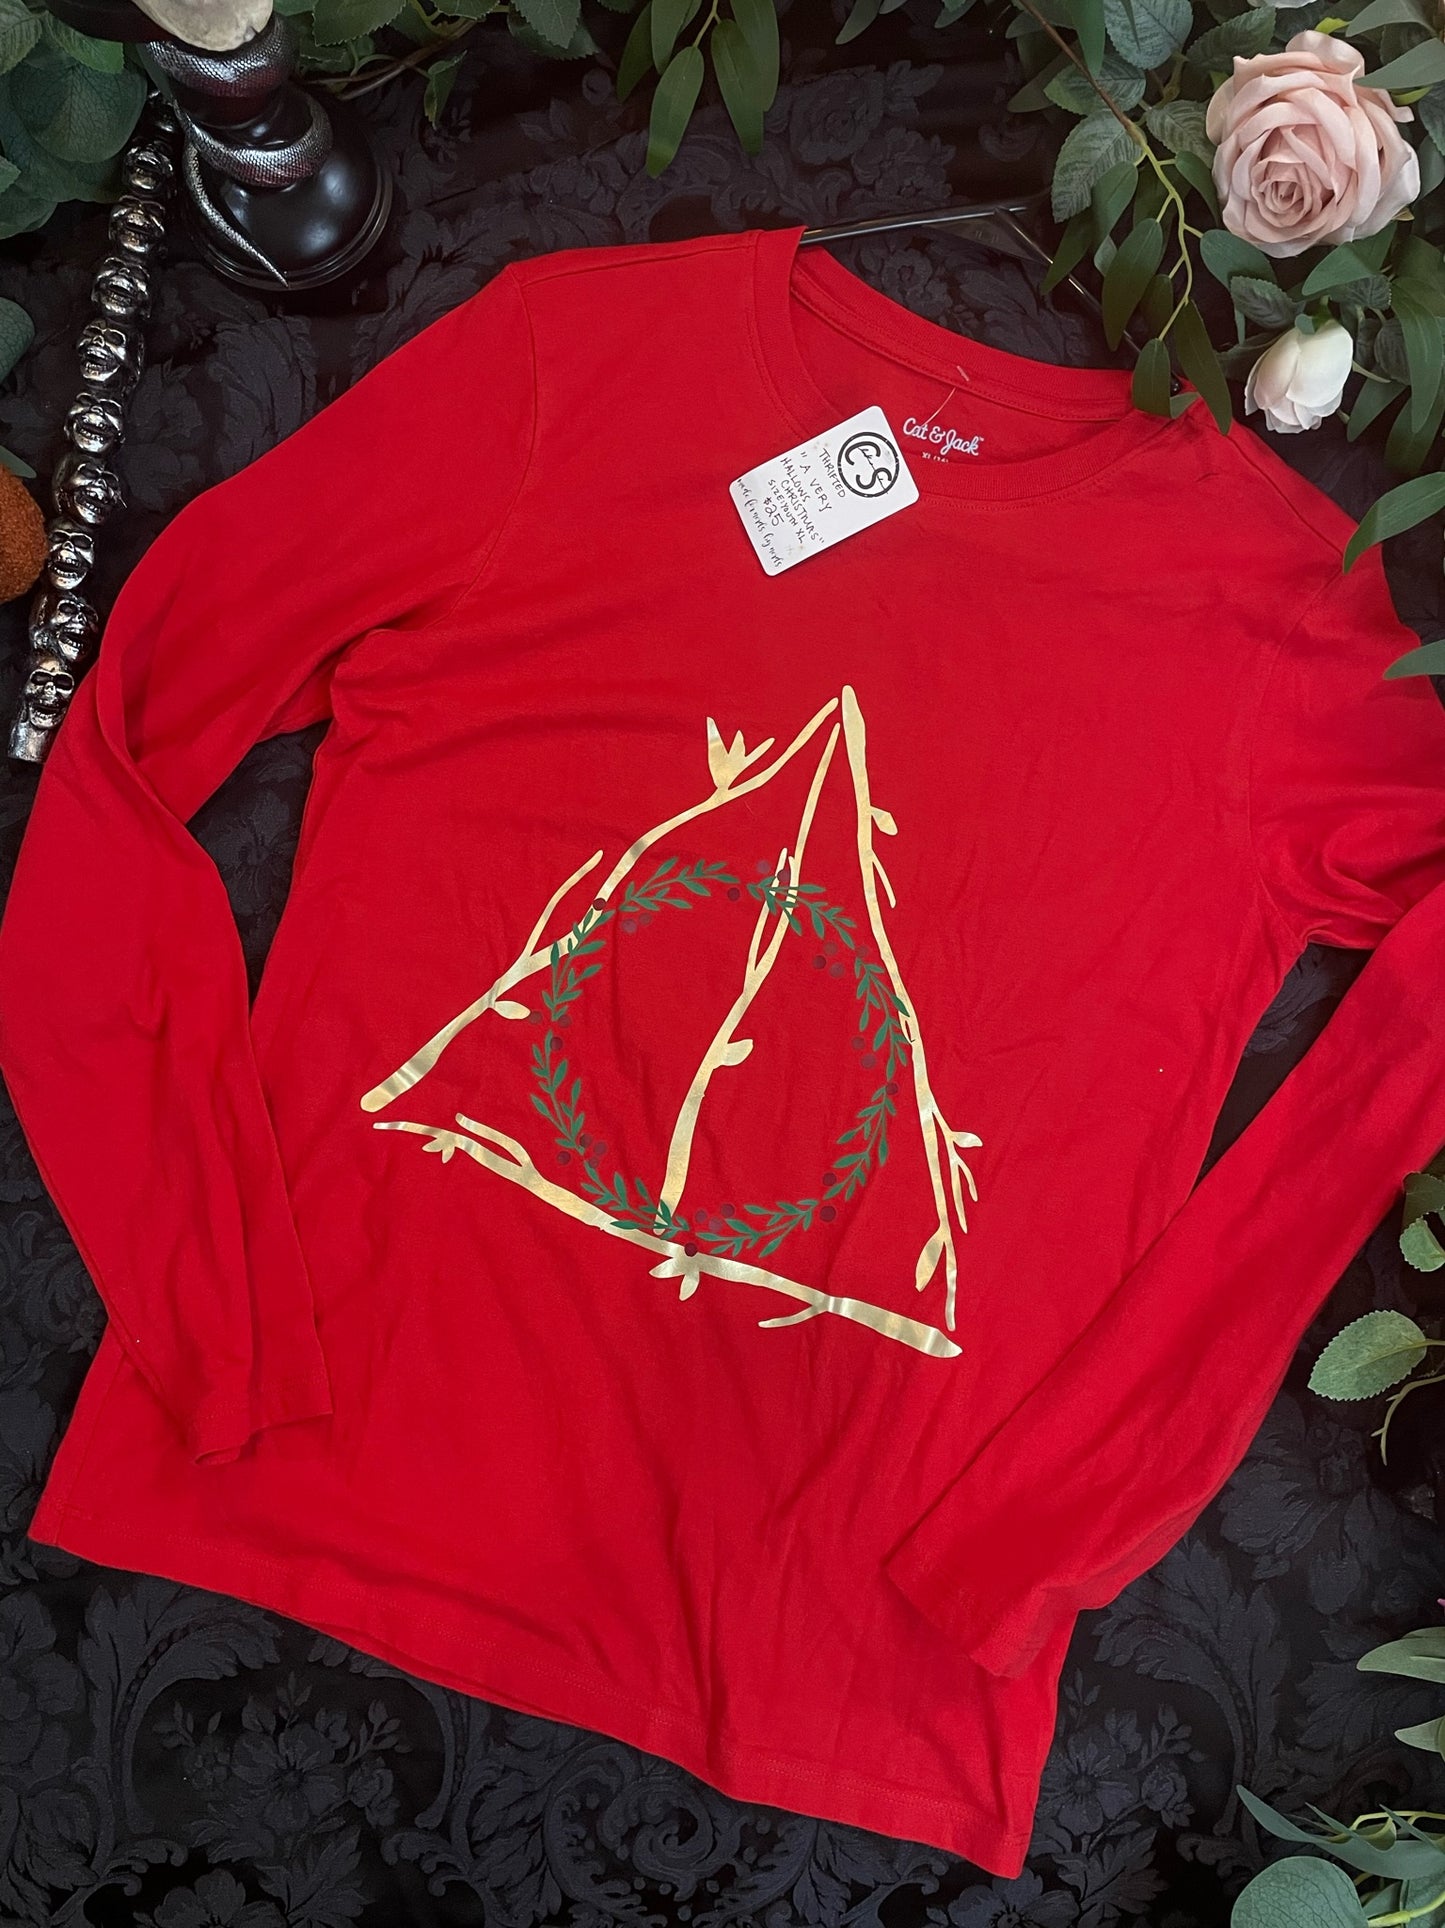 Thrifted - Youth XL - "A Very Hallows Christmas"